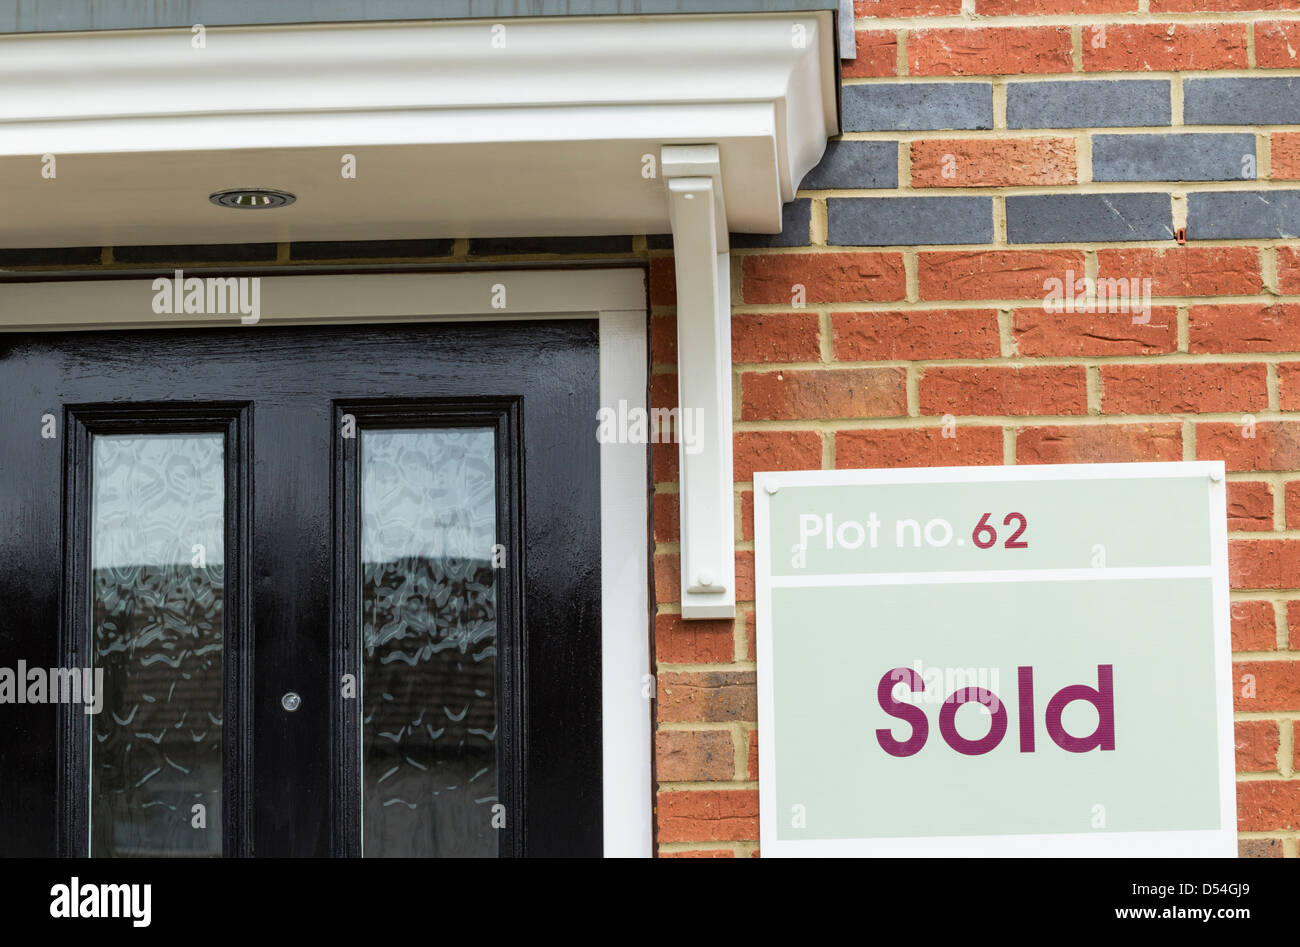 Sold sign on newly built house in Billingham near Stockton on Tees, north east England, UK Stock Photo